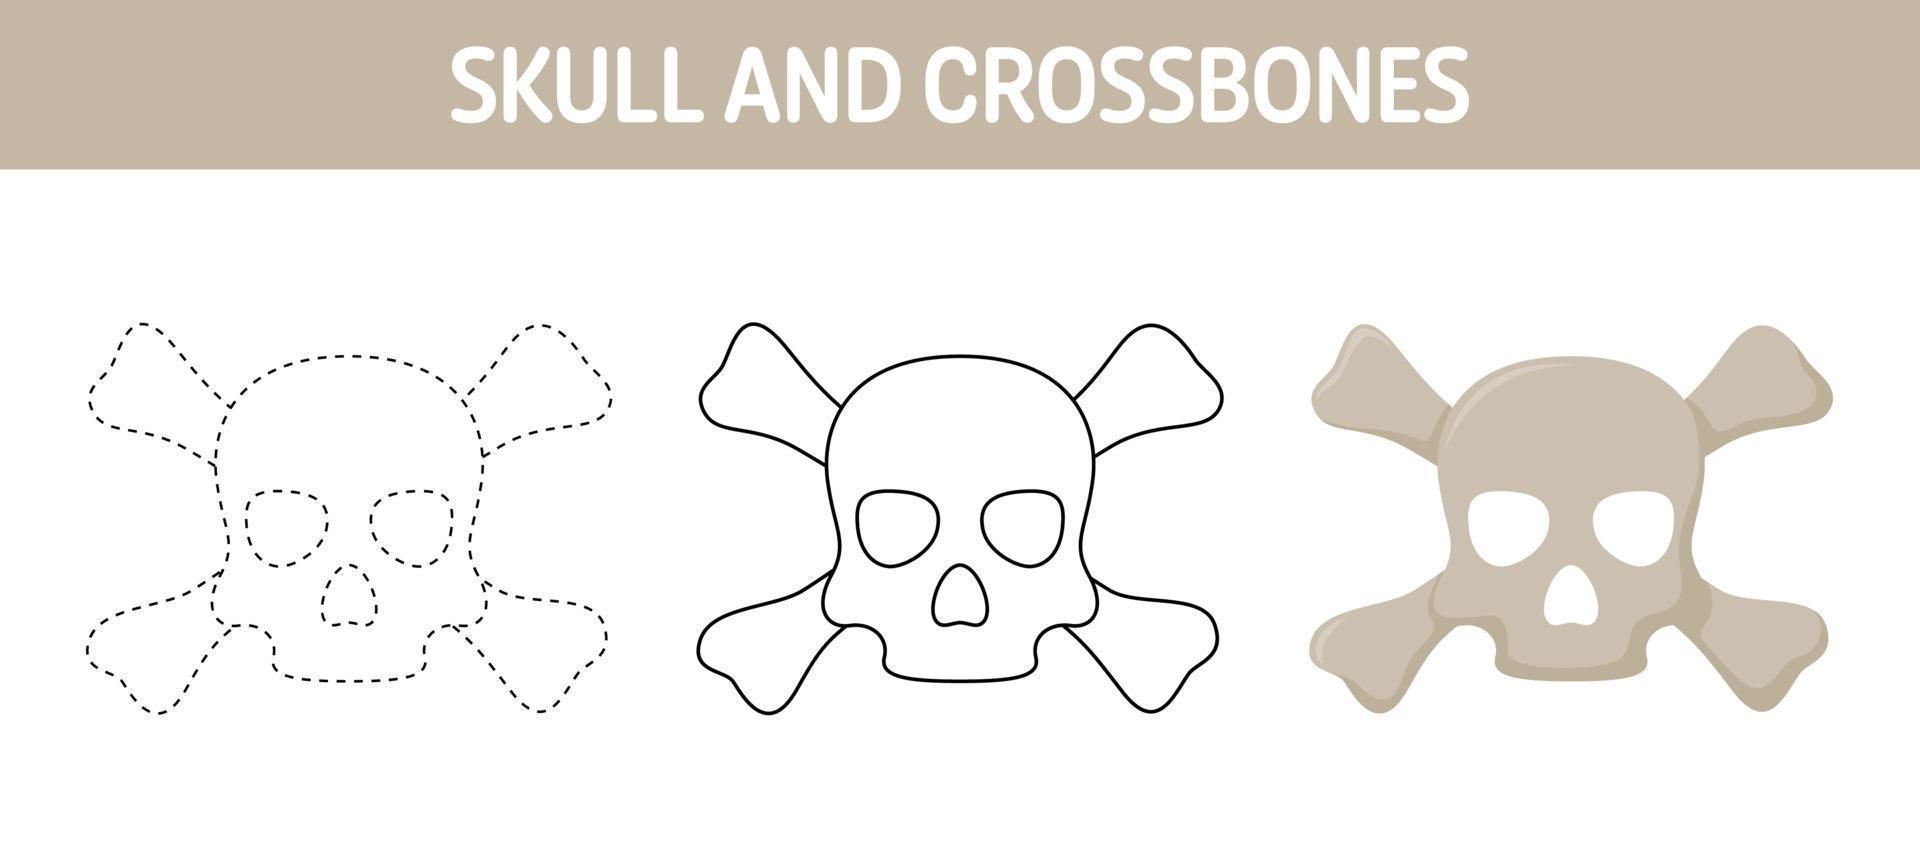 Skull And Crossbones tracing and coloring worksheet for kids vector